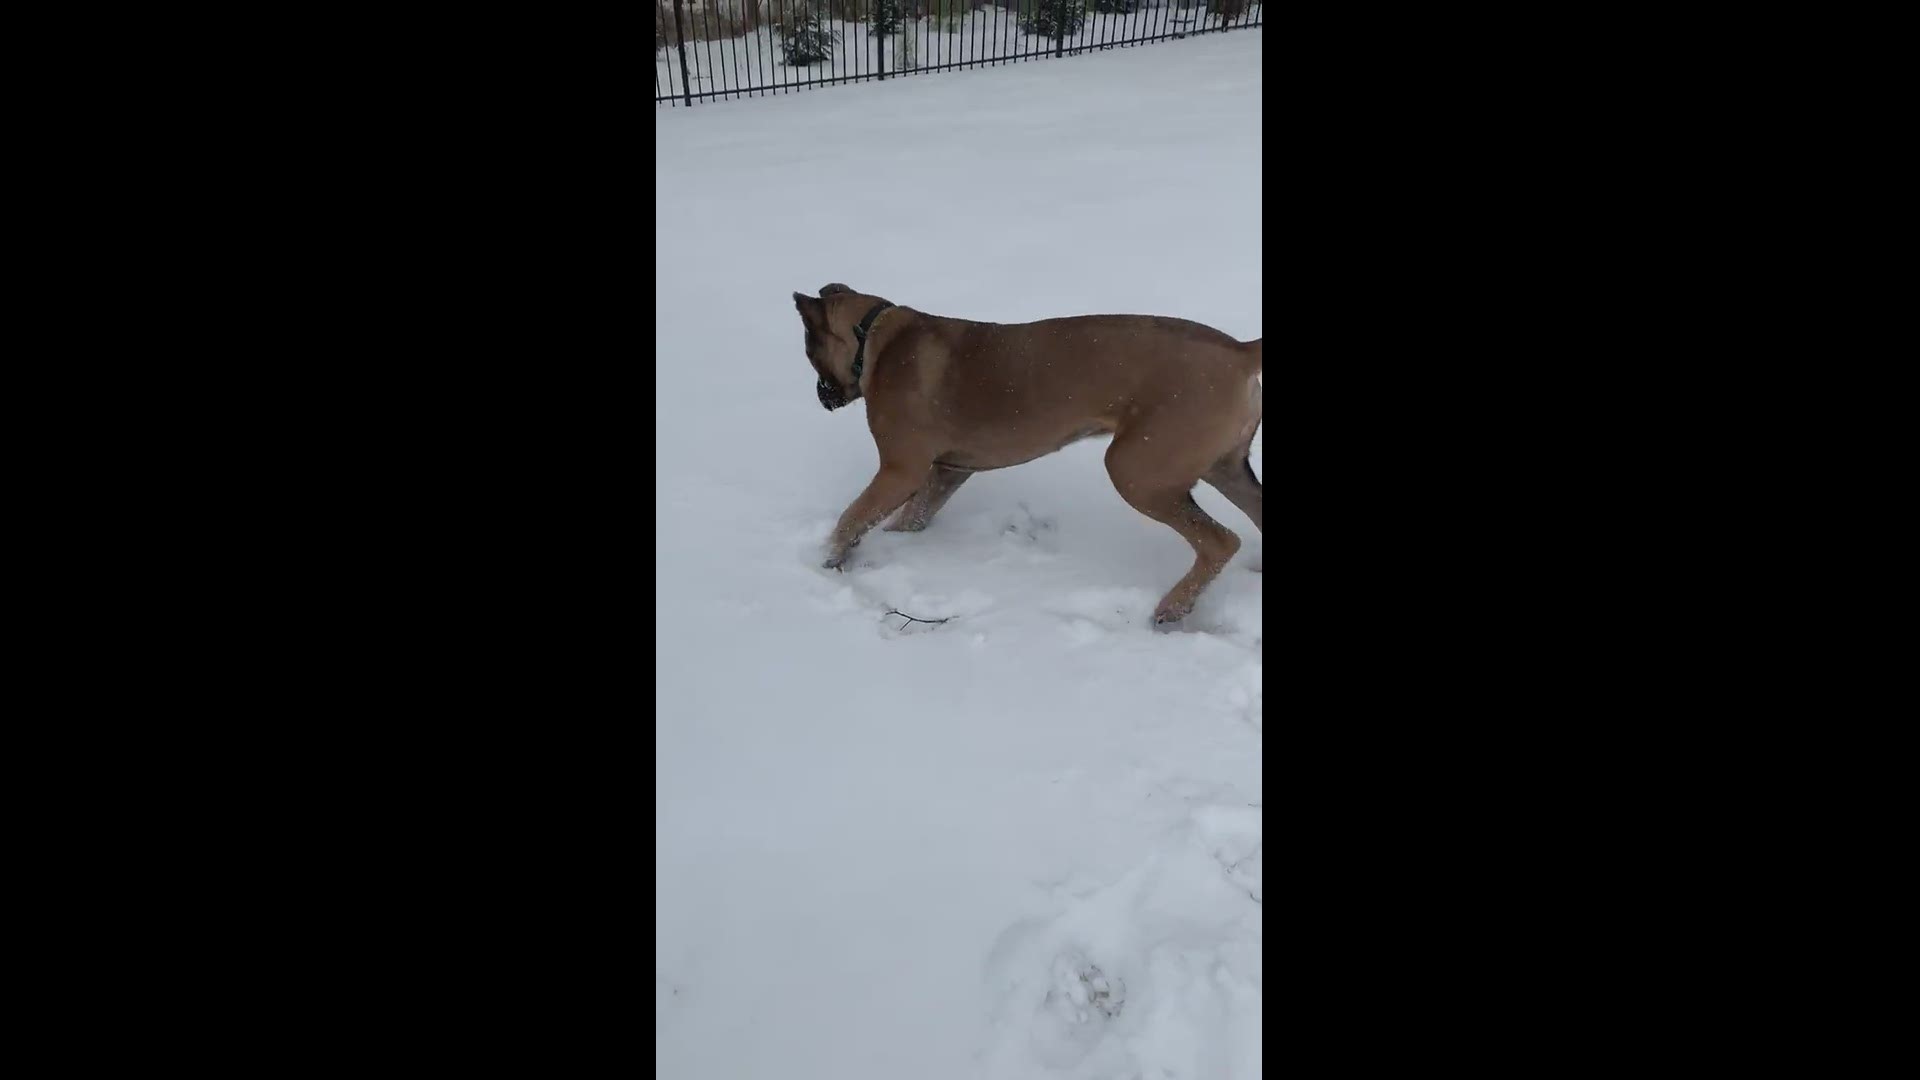 First Snow Day for Freight, the Cane Corso - Olive Branch, MS
Credit: Rebekah Olsen